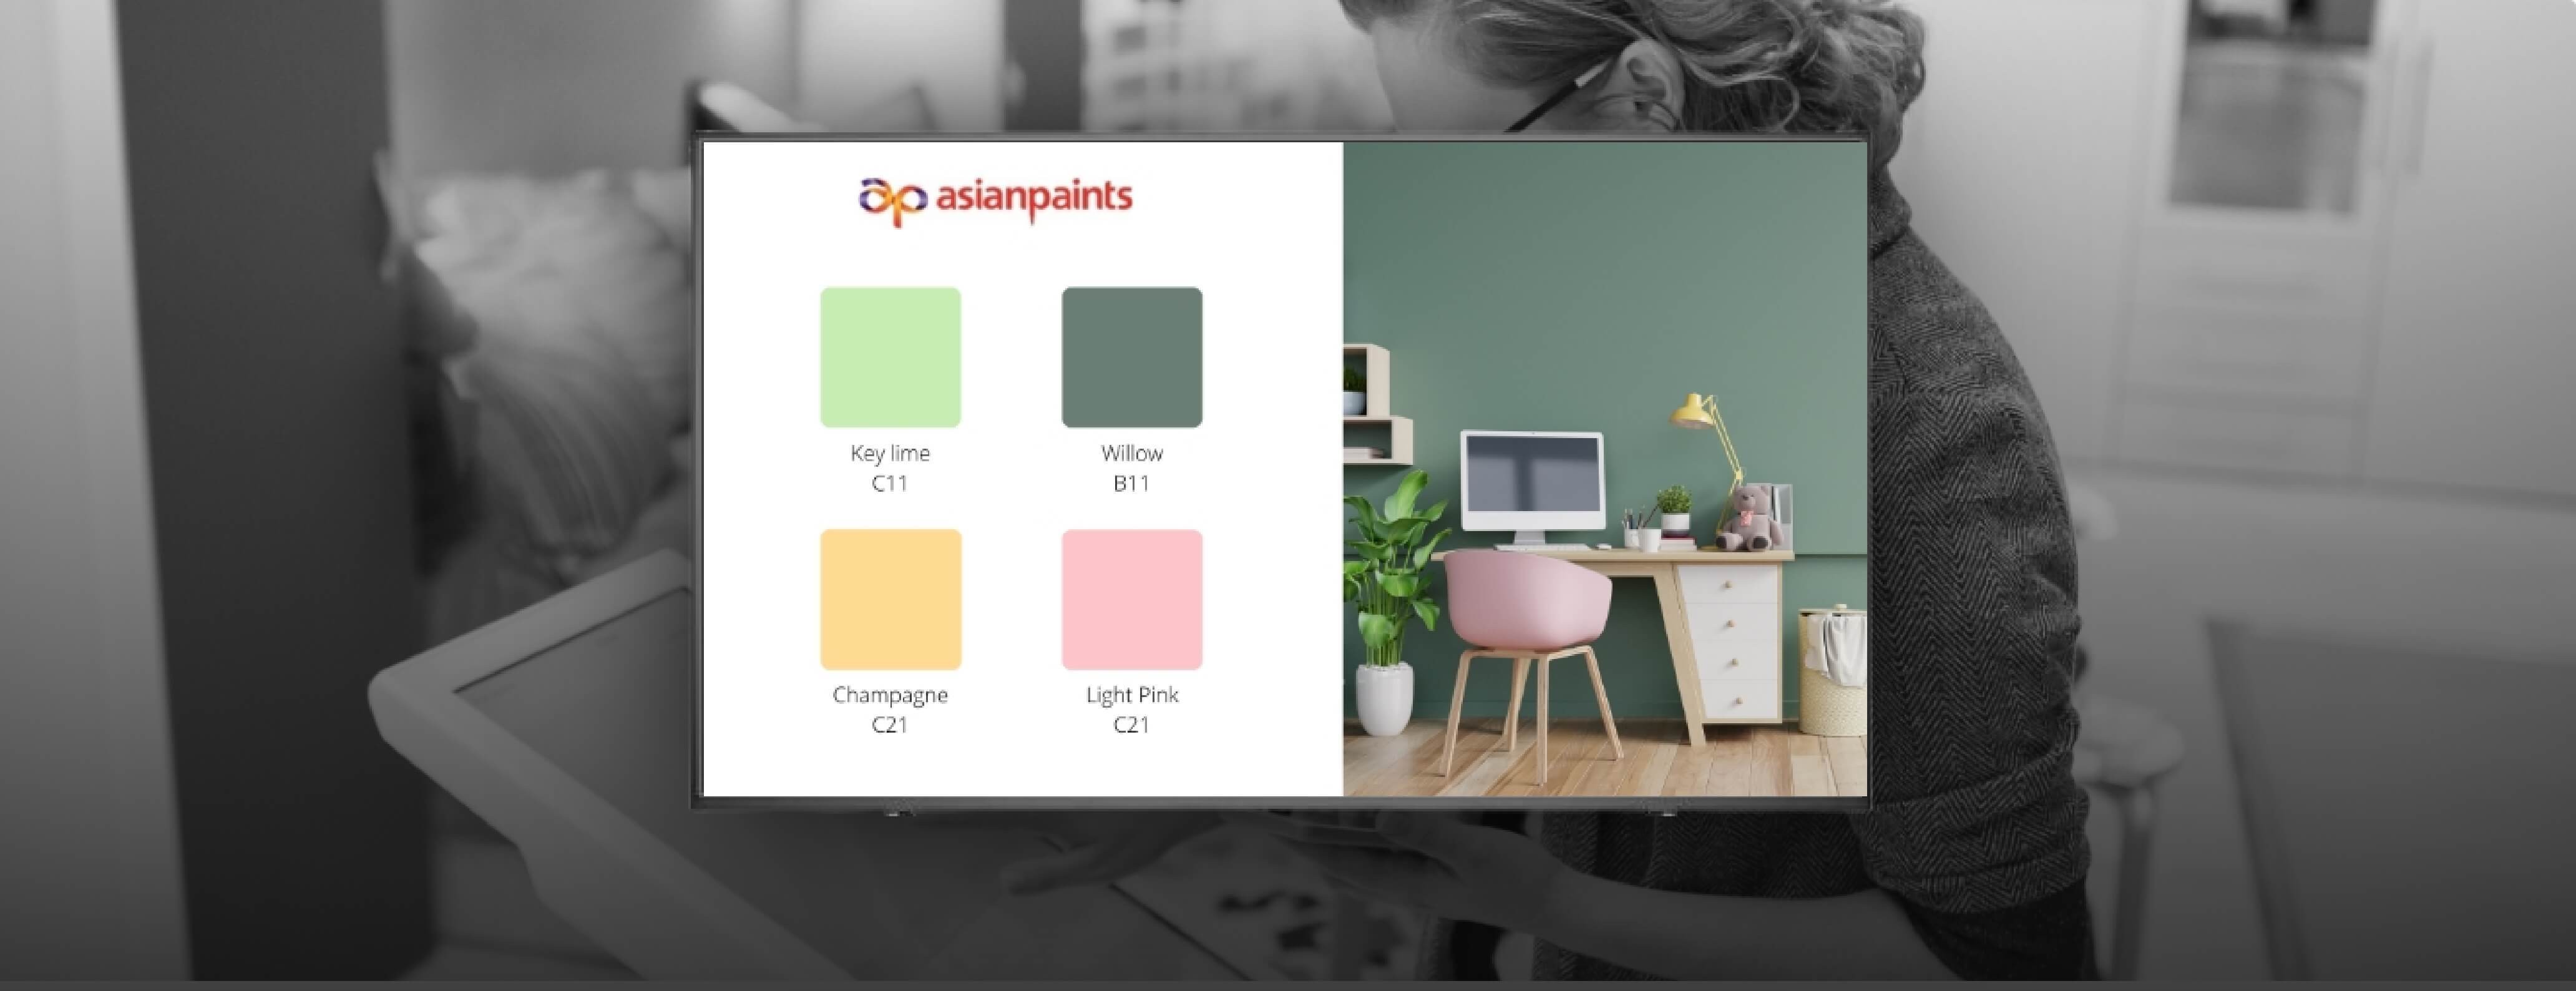 Digital Signage screen at paint store collections of paint colors using Pickcel's Software